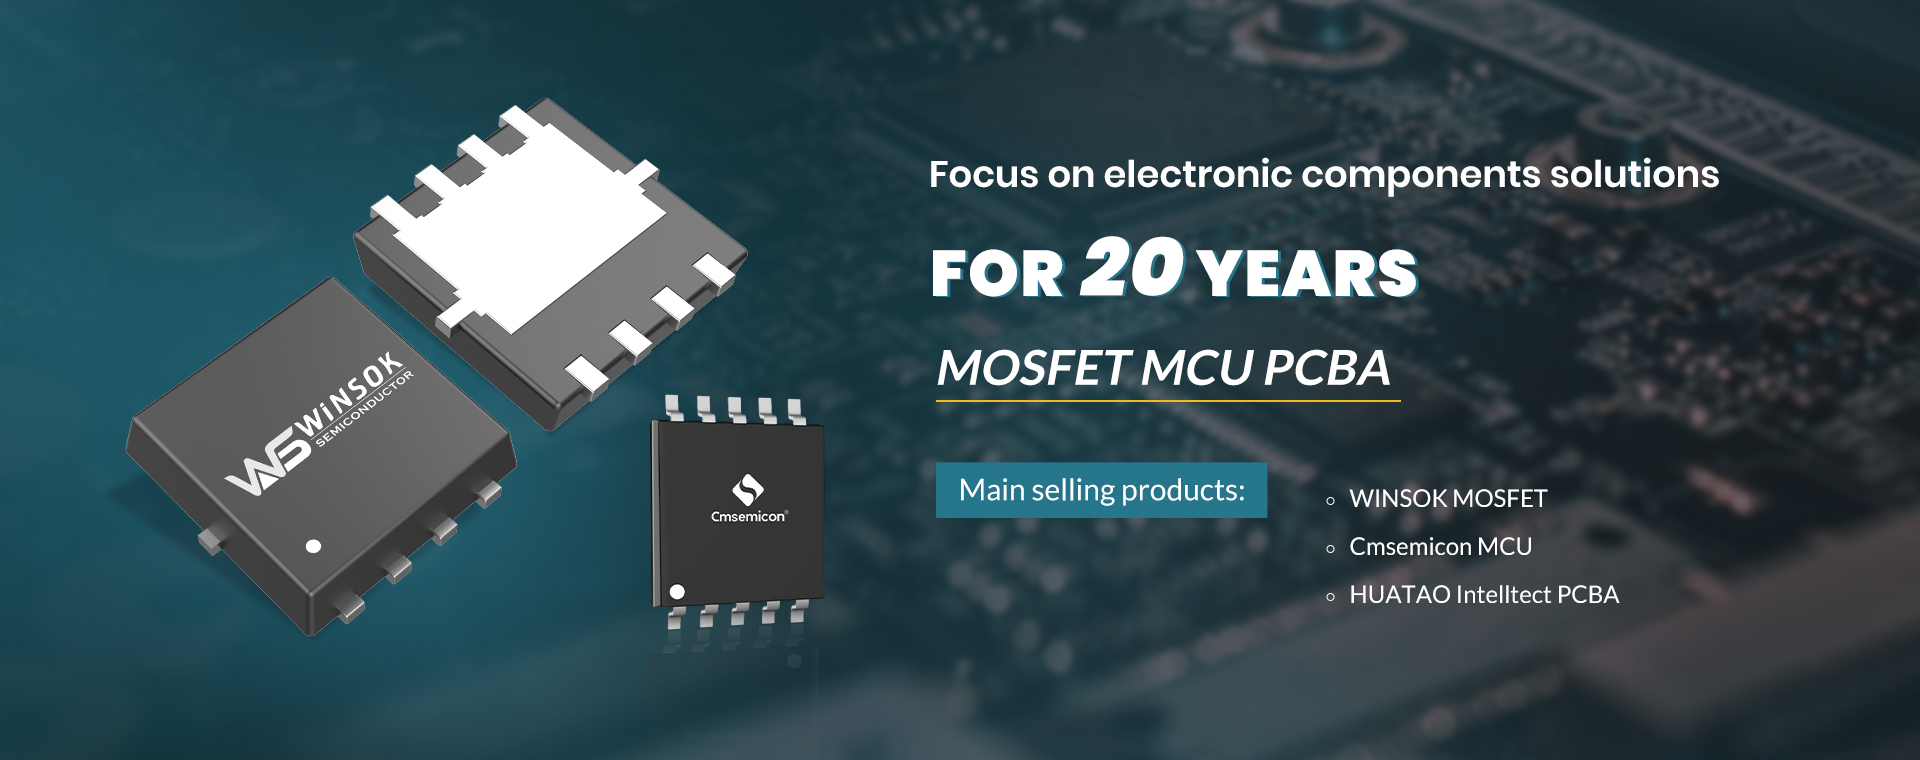 MOSFETs, FETs, MCUs - Olukey